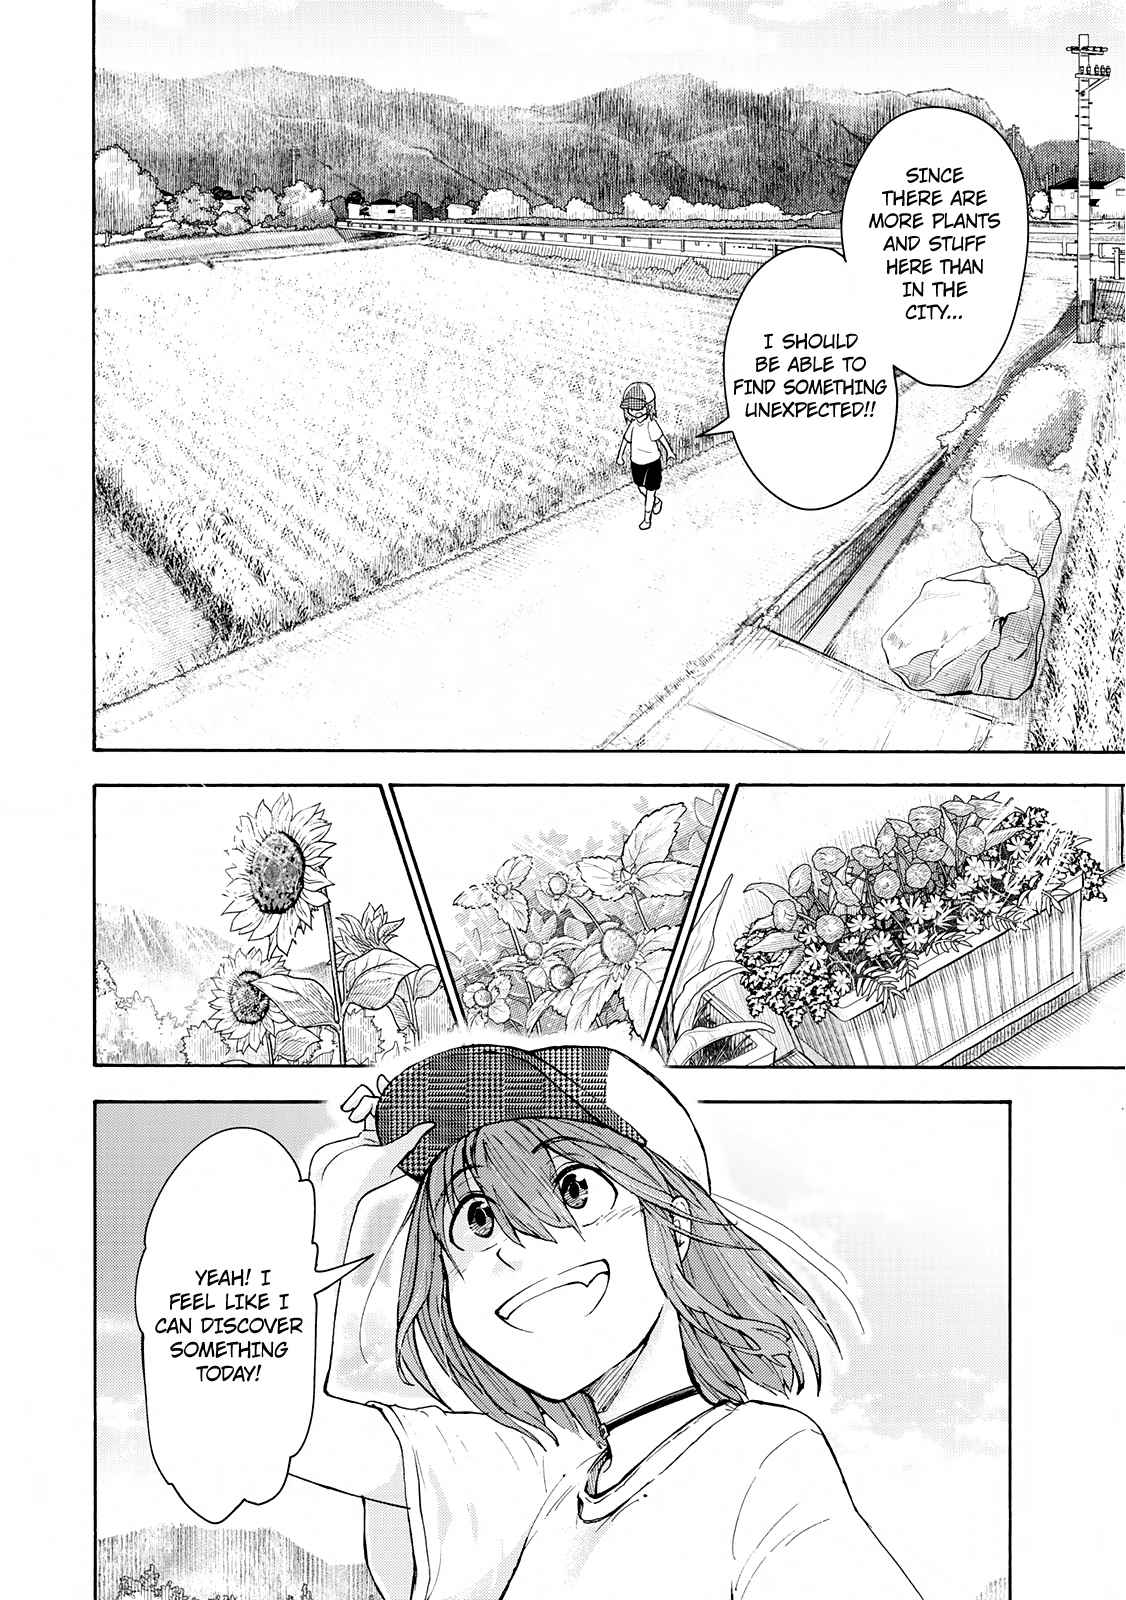 Hiyumi's Country Road Ch. 5 Rumbling, Sparkling Thunder